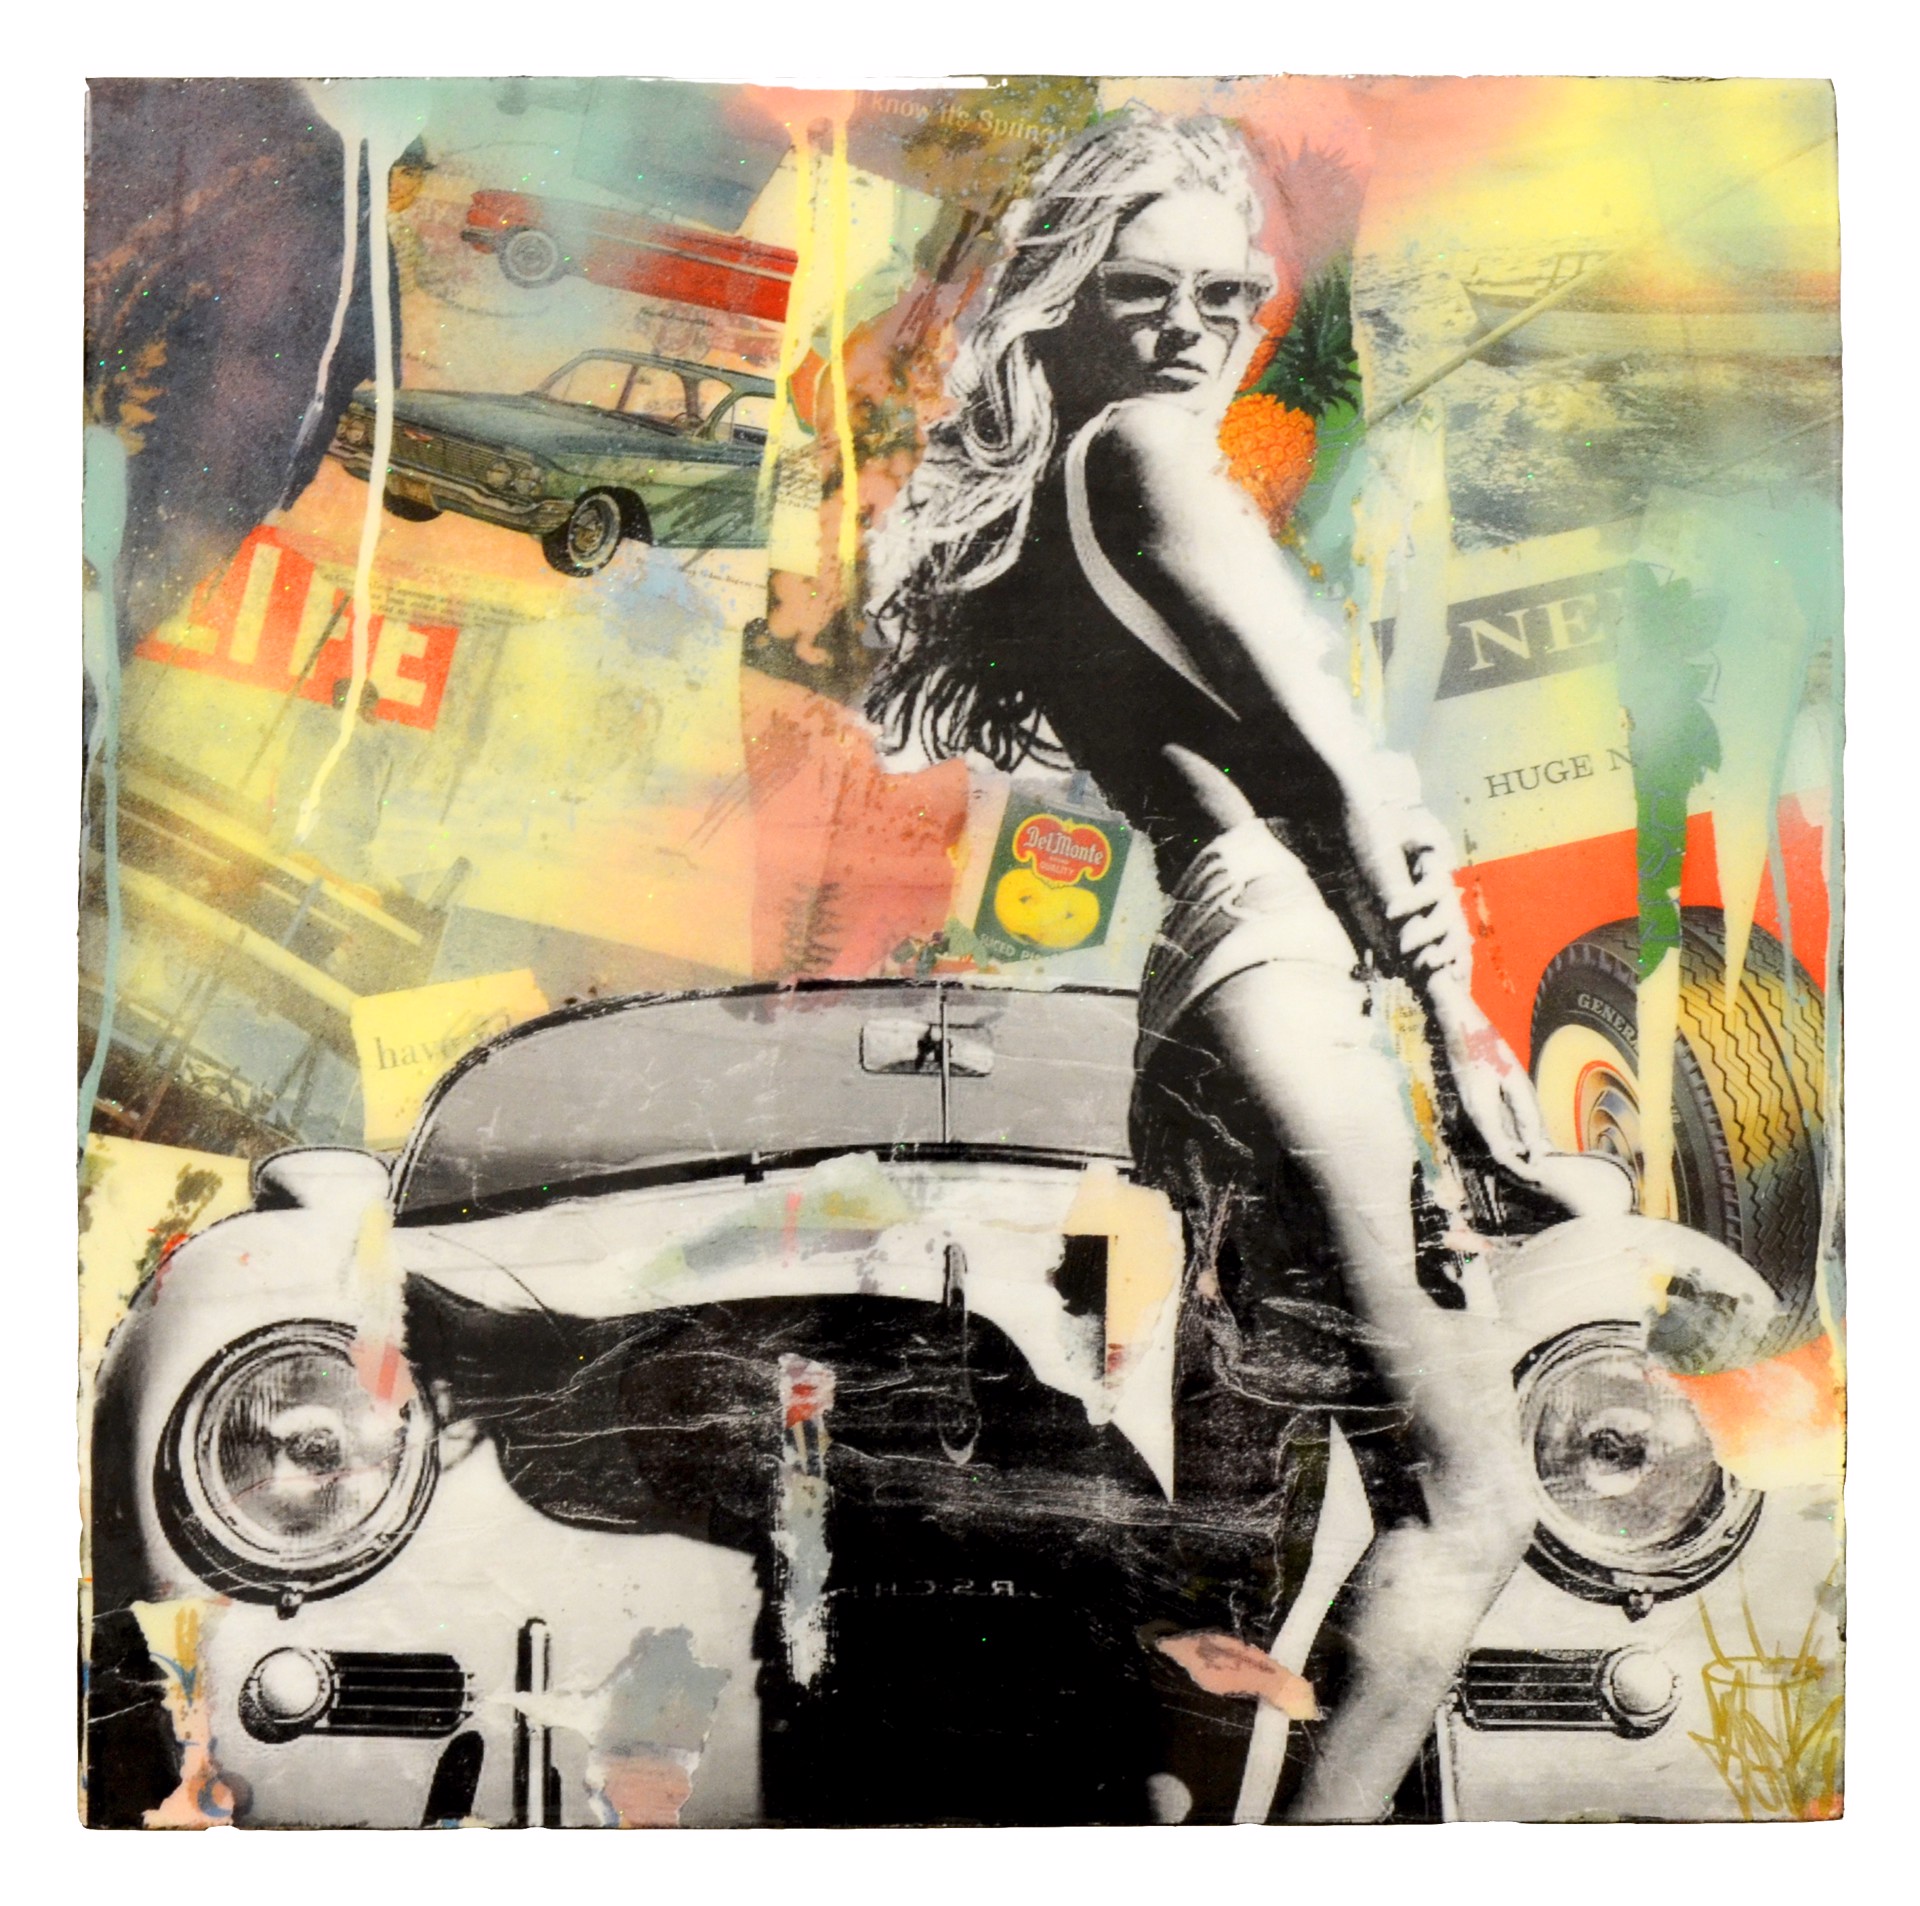 Porsche Girl - SOLD - commission available by Seek One